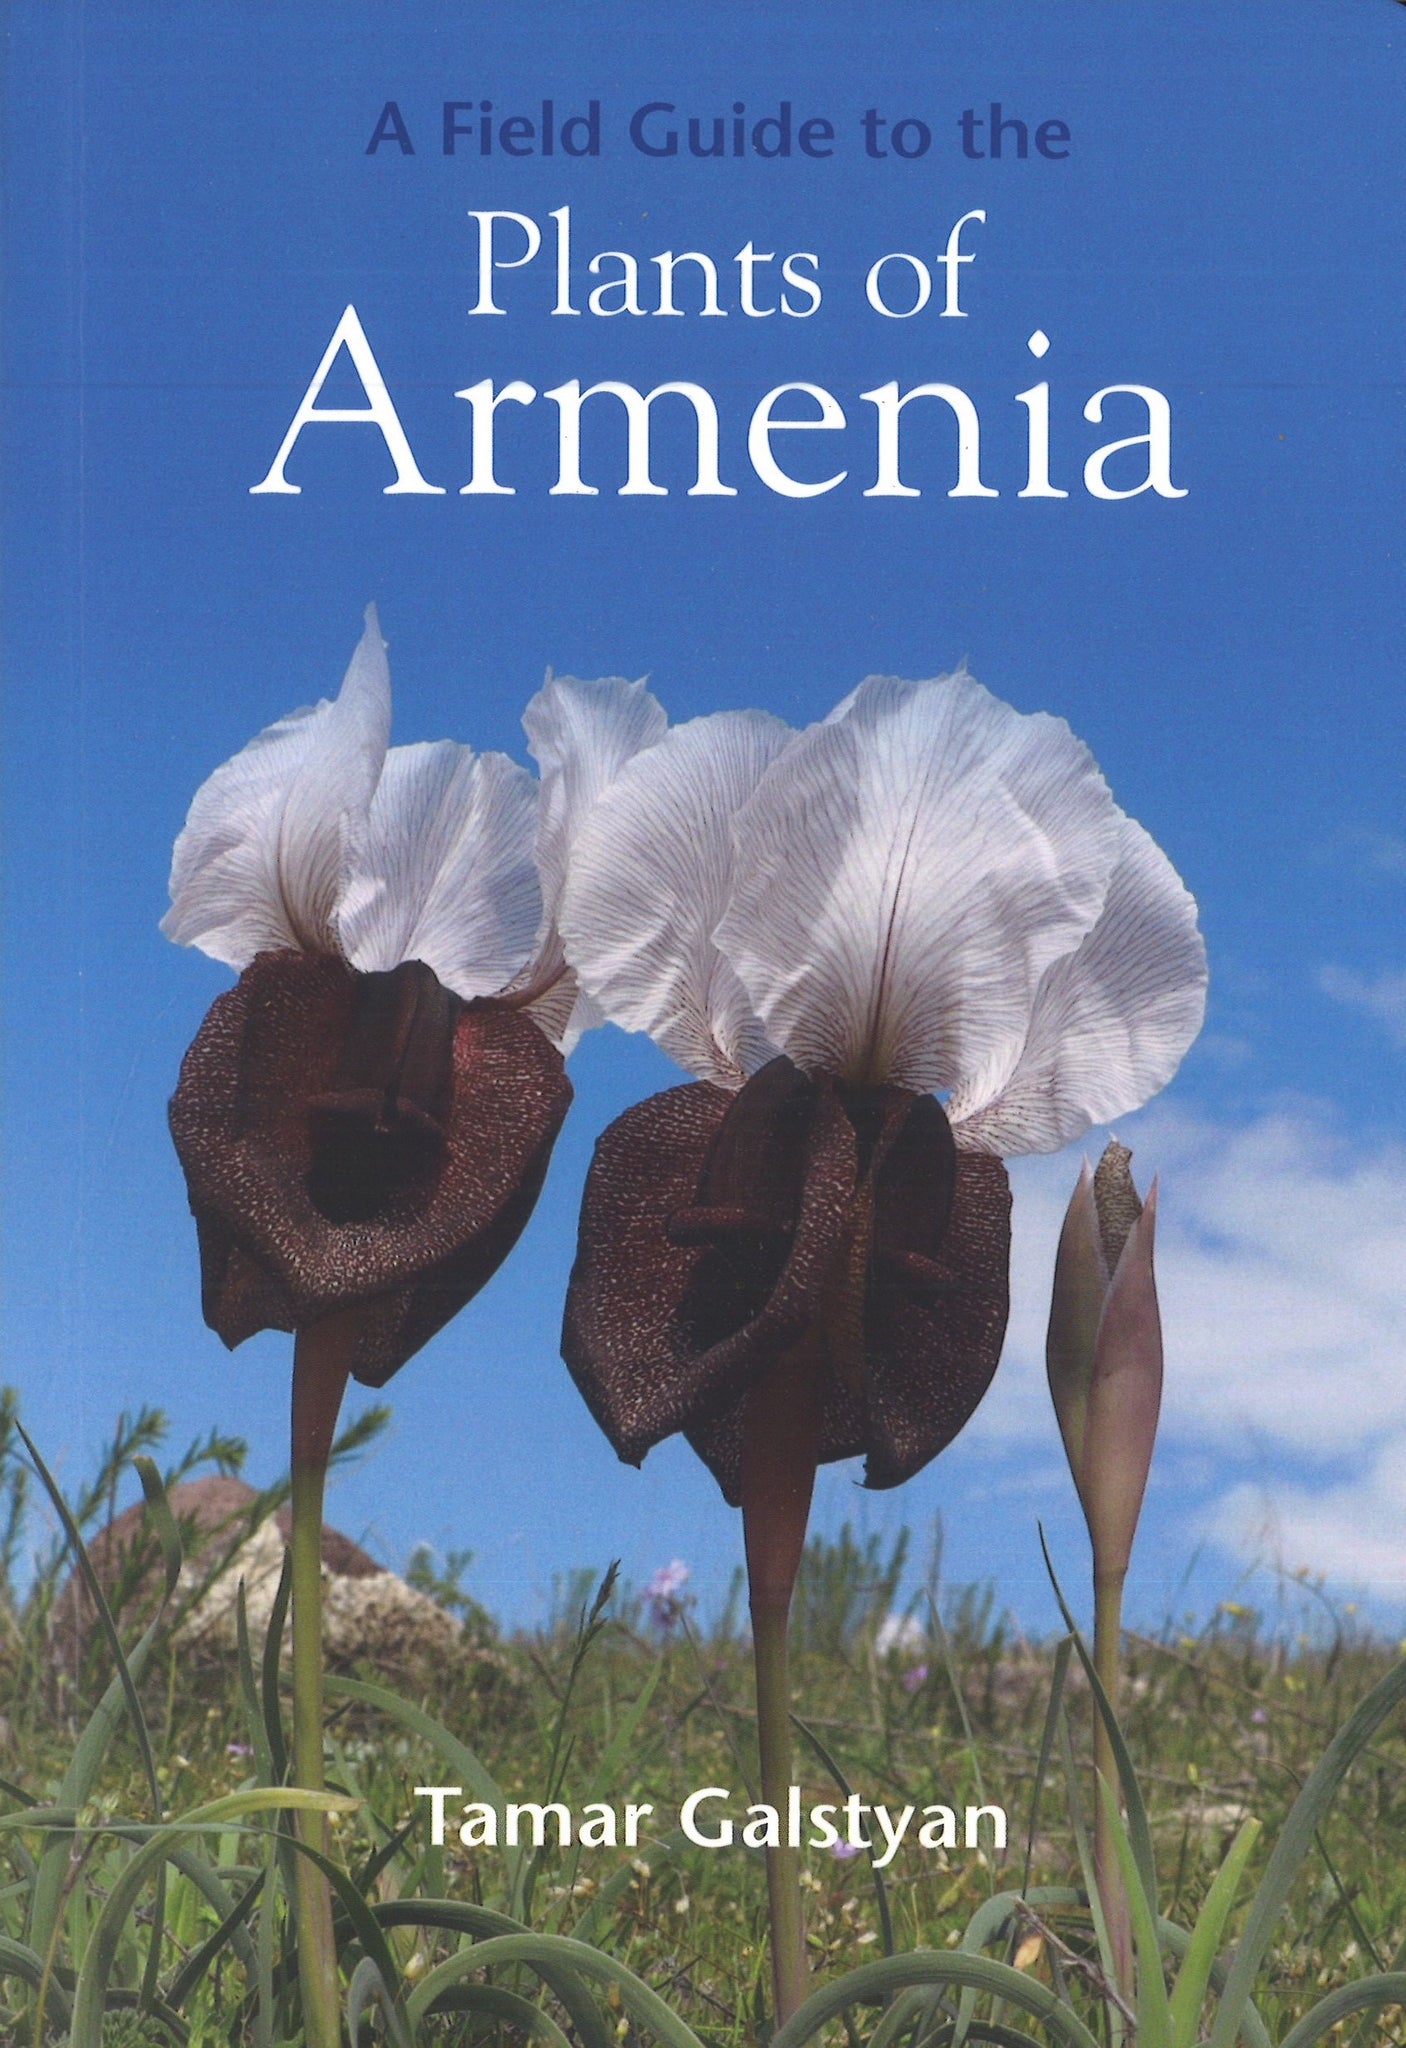 Field Guide to the Plants of Armenia, A